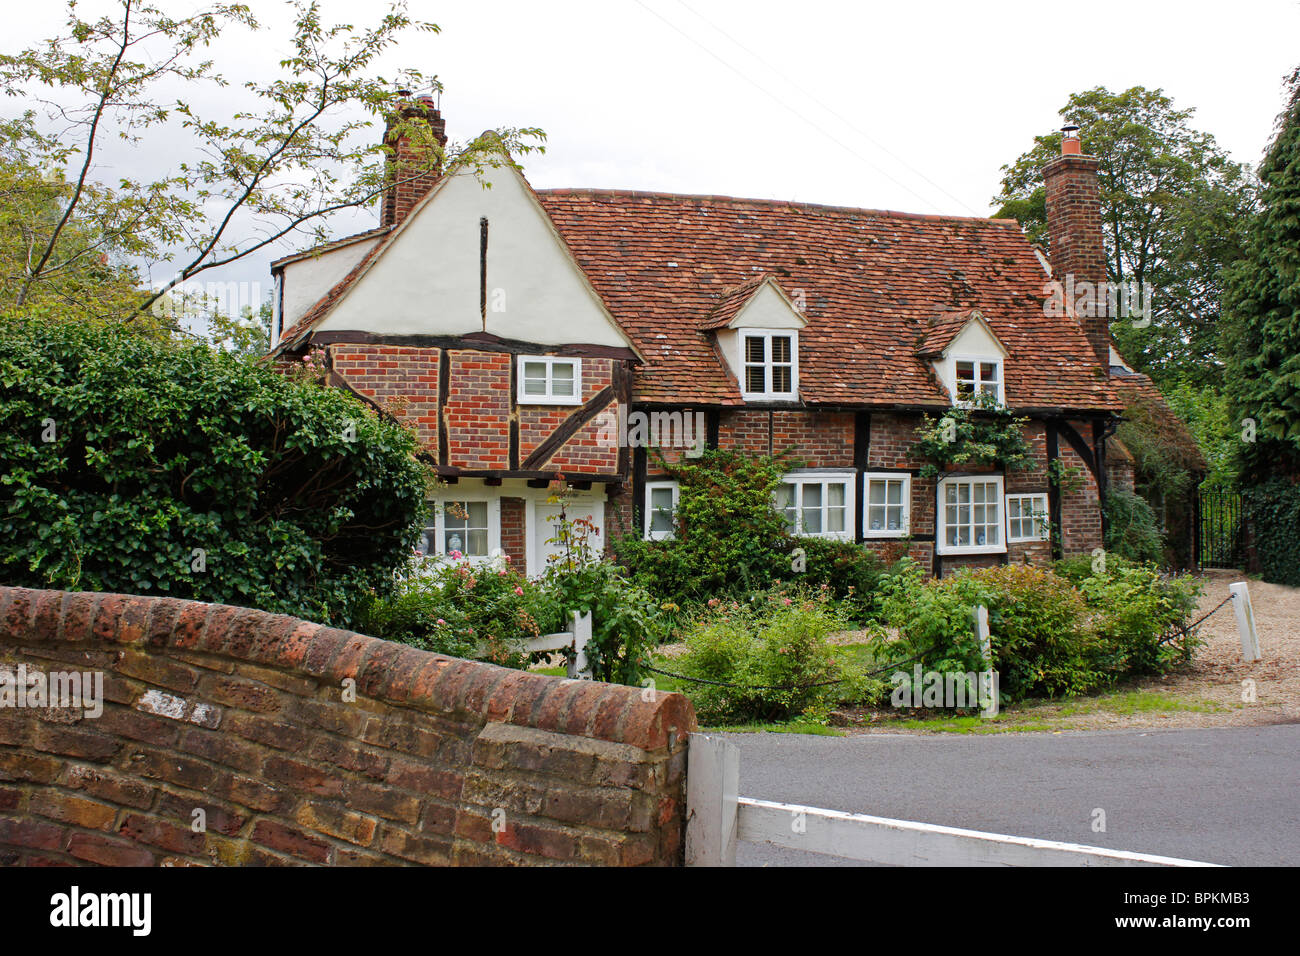 Misbourne Cottage in Denham used as the home of Miss Marple in films made by the actress Margaret Rutherford. Stock Photo